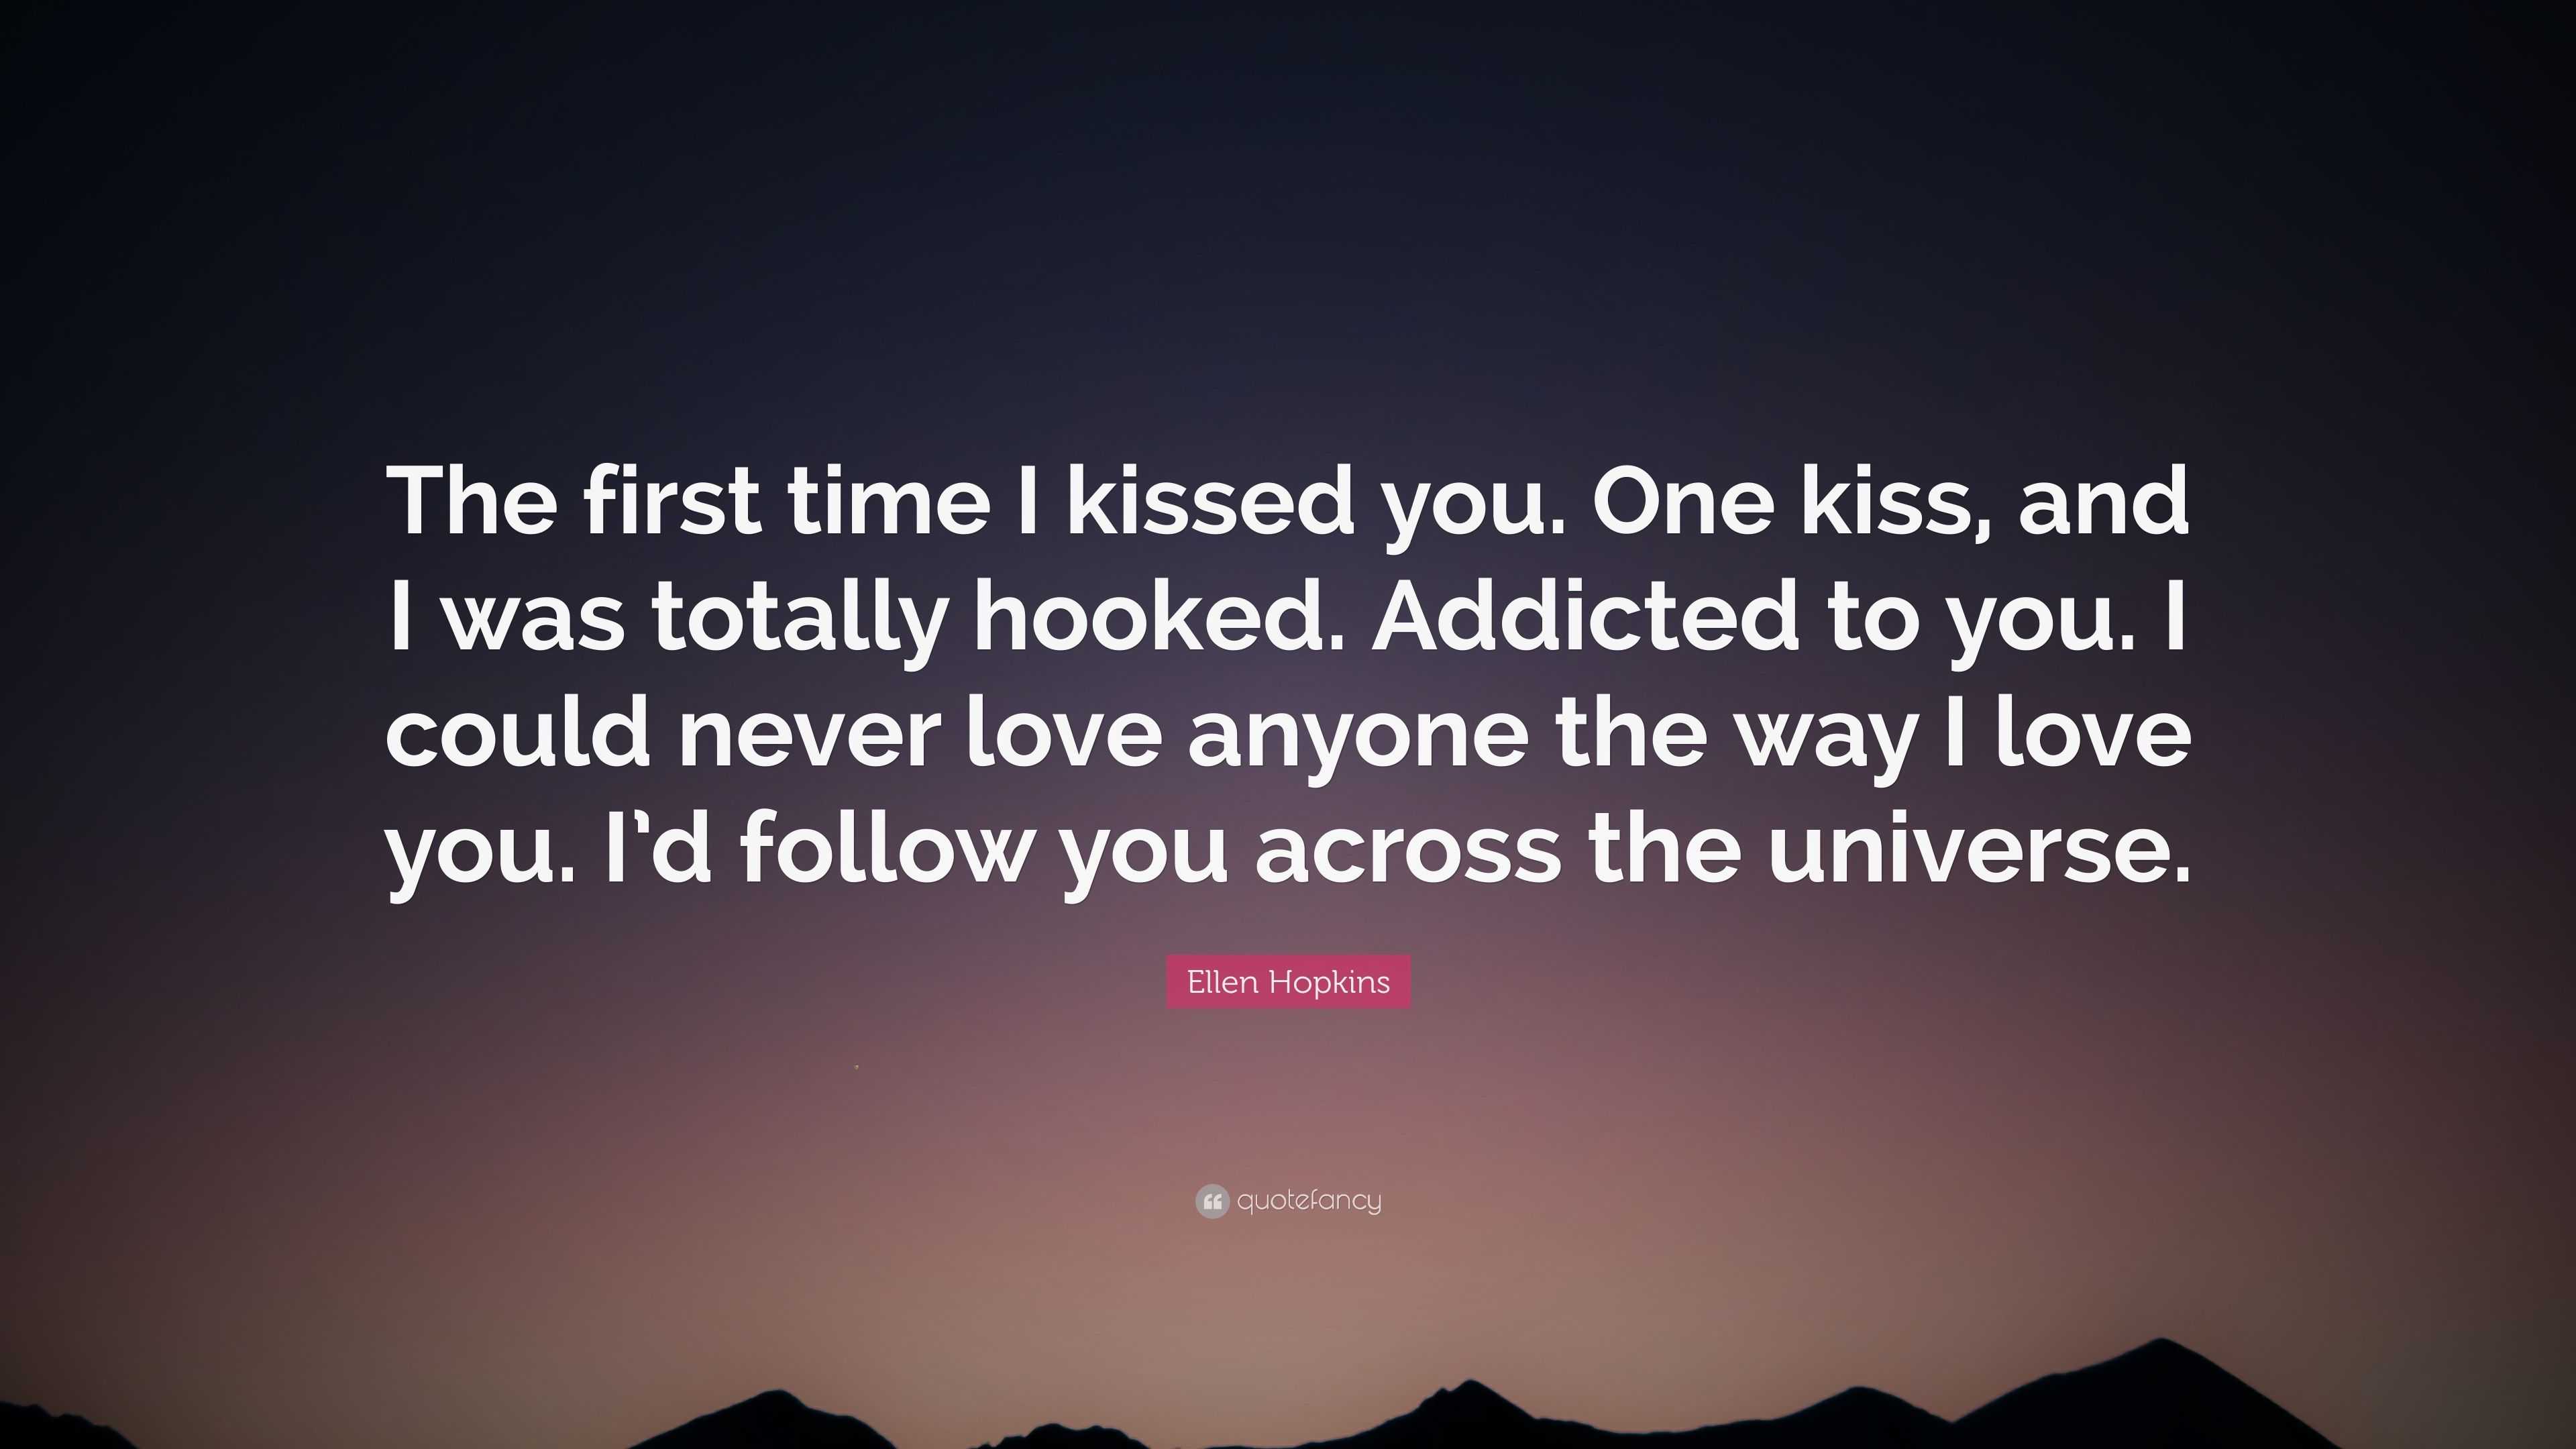 100 and some thoughts  First kiss quotes, One direction lyrics, Kissing  quotes